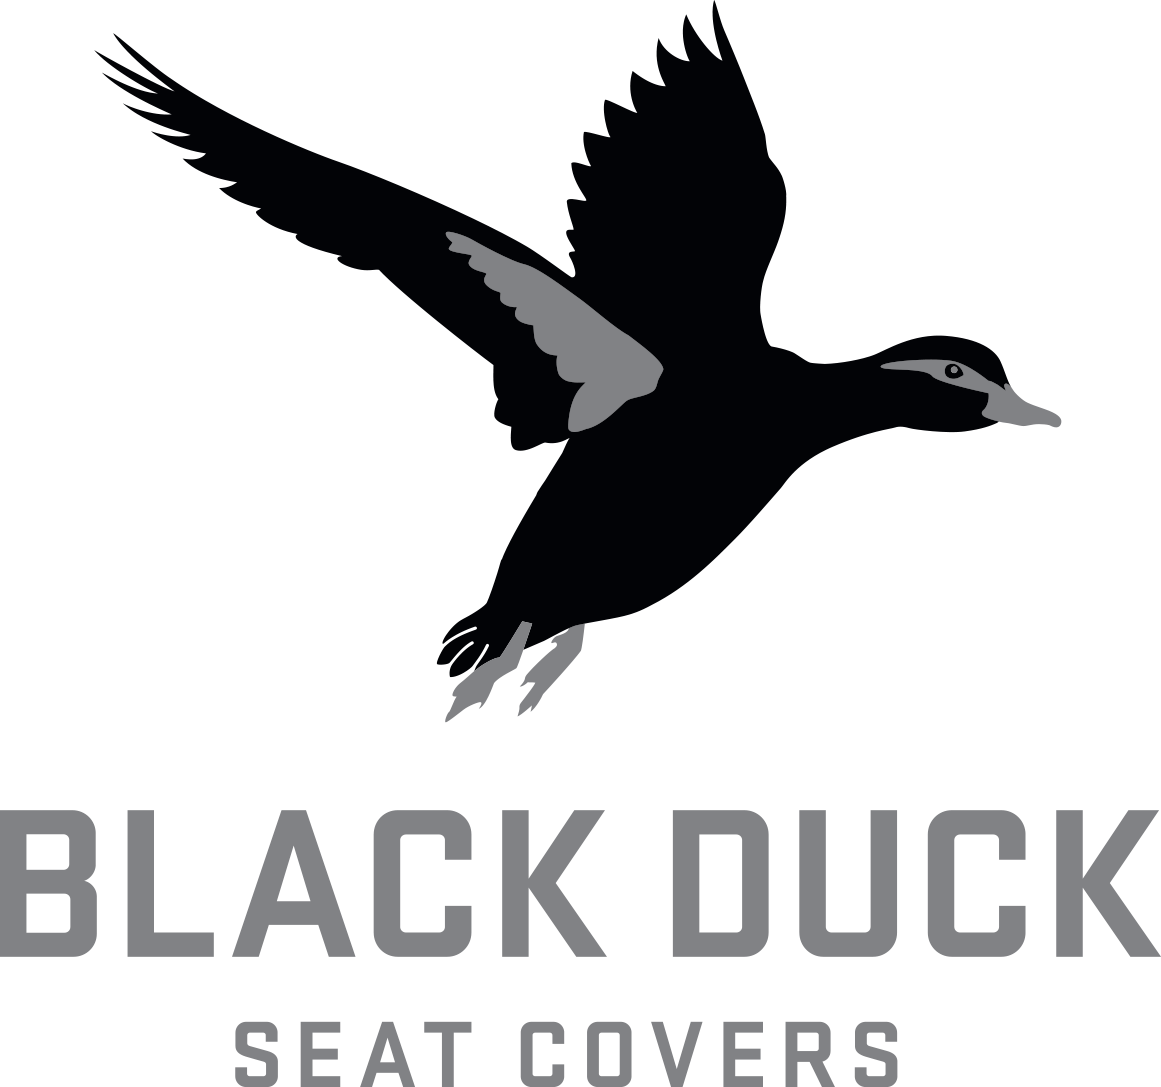 Black Duck Seat Covers to fit VW Transporter T^ from 11/2015 onwards.